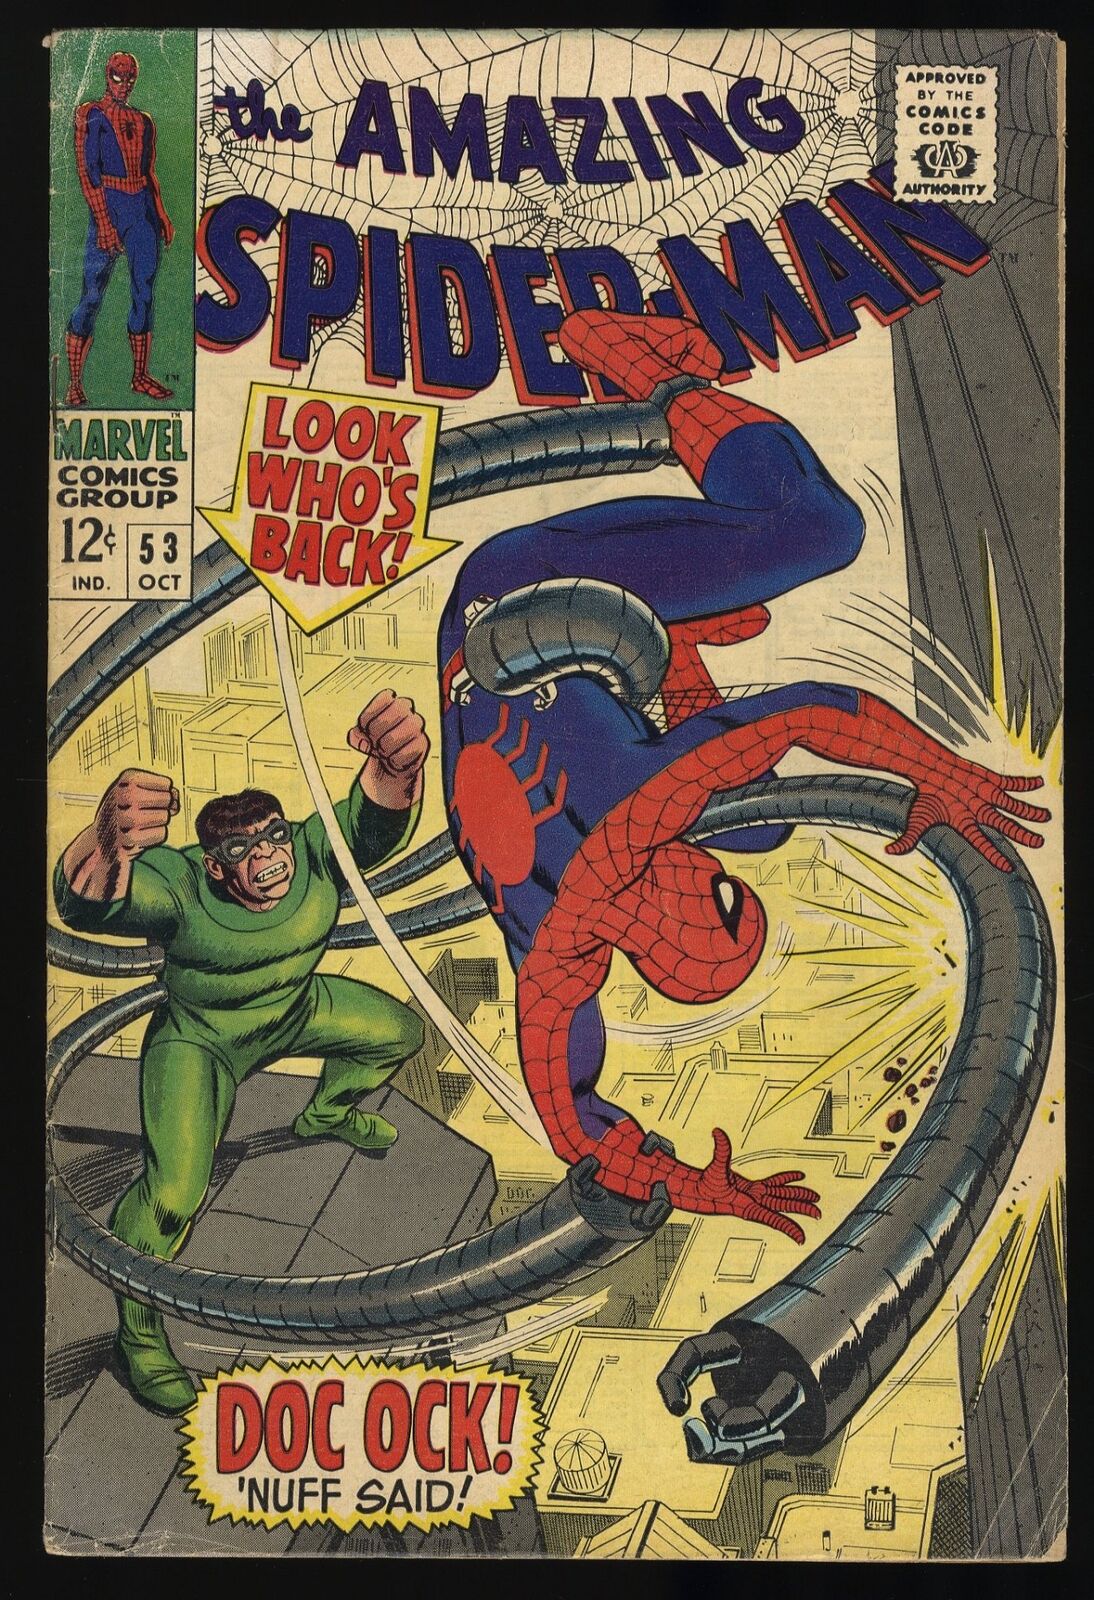 Amazing Spider-Man #53 VG+ 4.5 Doctor Octopus Appearance Key Issue Marvel 1967